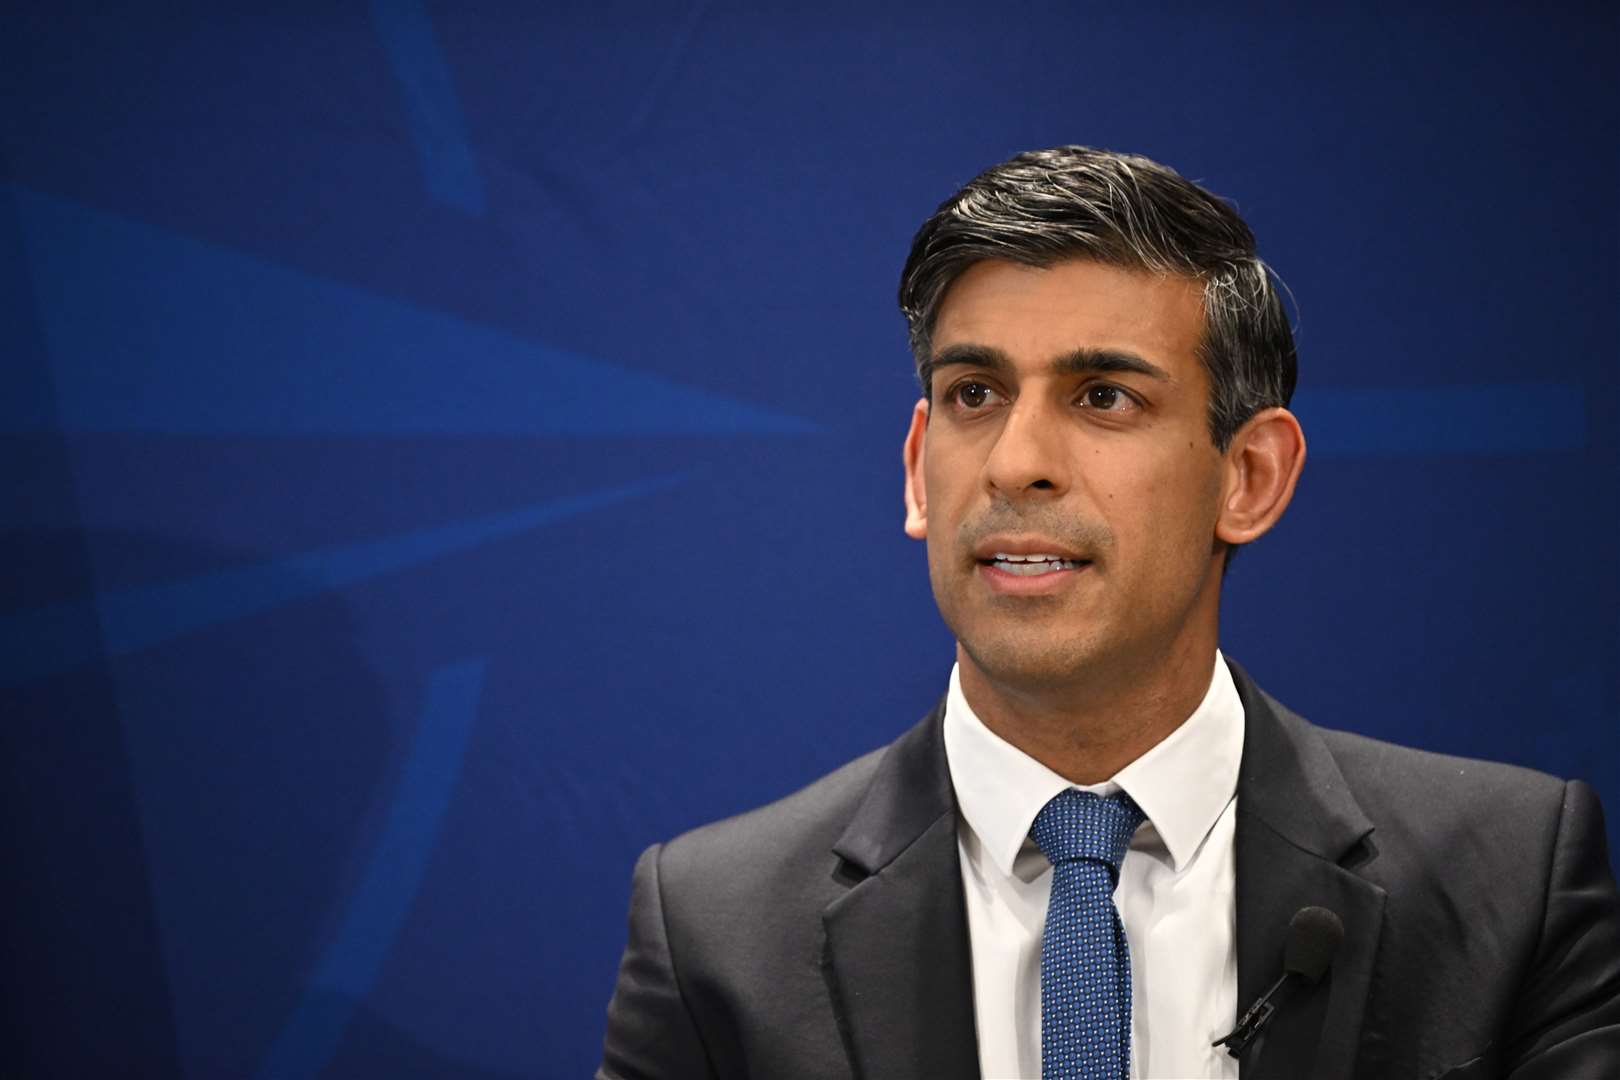 Prime Minister Rishi Sunak said ‘fairness’ for both workers and taxpayers will be at the heart of any decisions (Paul Ellis/PA)